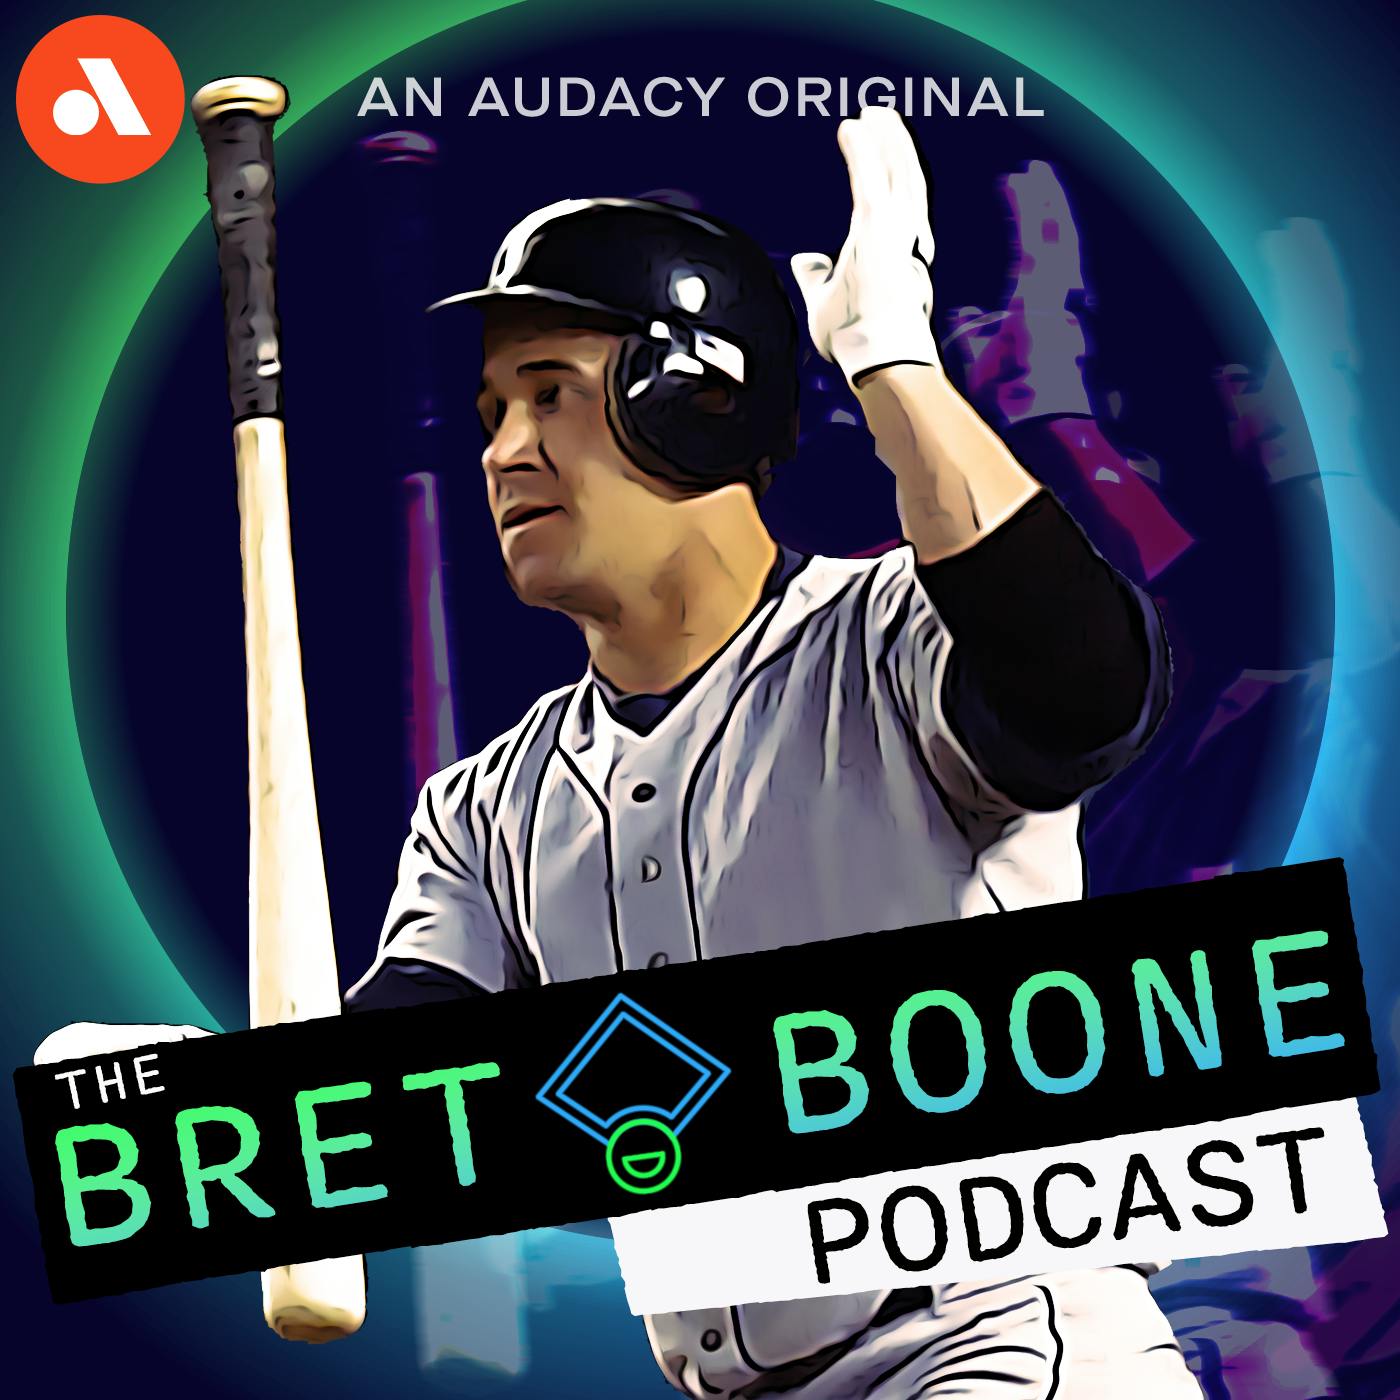 The Bledsoe-Brady Relationship | 'The Bret Boone Podcast'